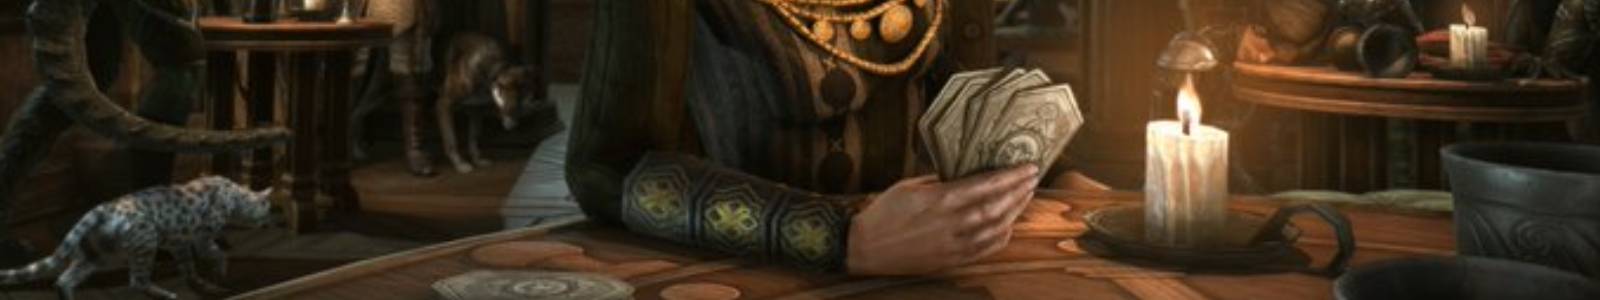 Lantern of the Endless Clue Tales of Tribute Clue - ESO header